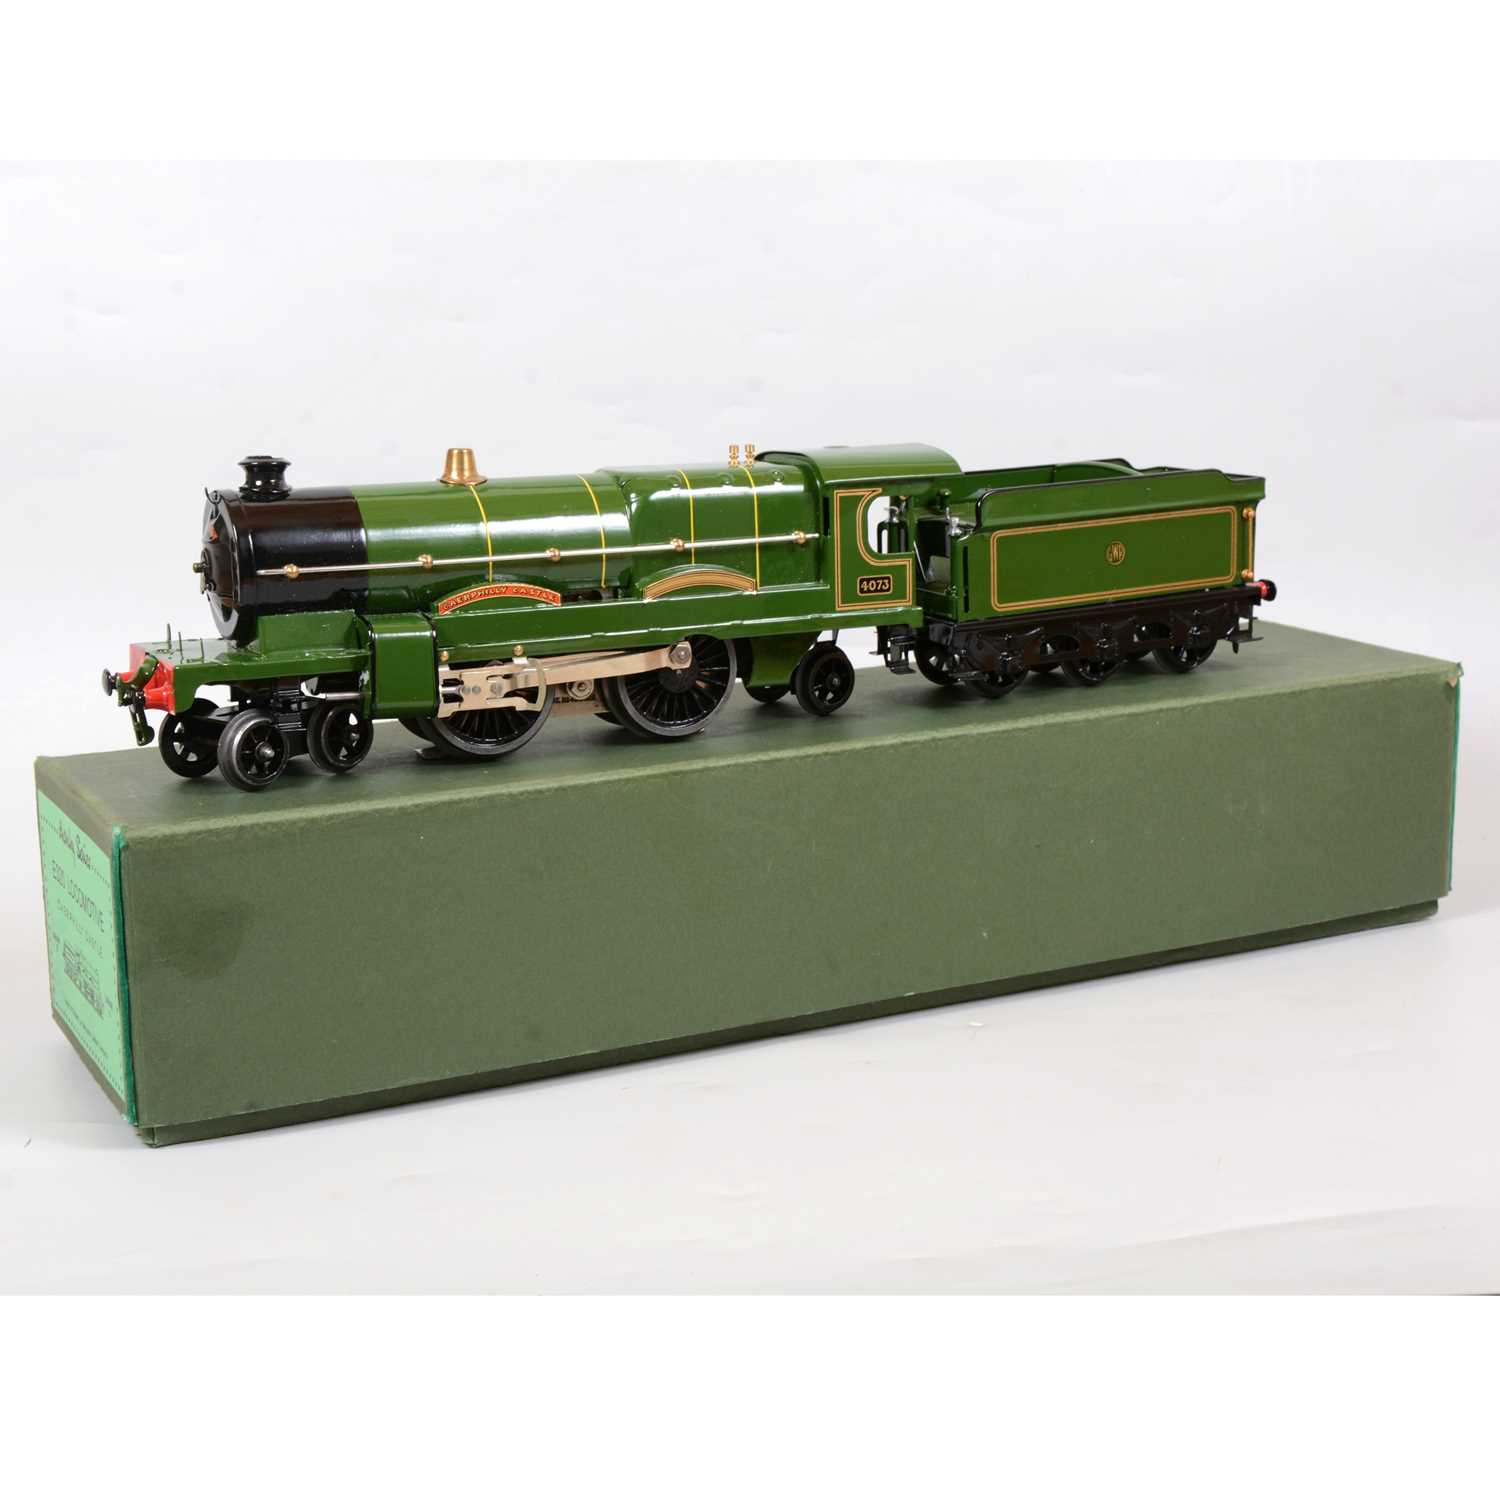 Lot 6 - Hornby O gauge electric model railway locomotive and tender, E320 GWR 4-4-2, 'Caerphilly Castle'